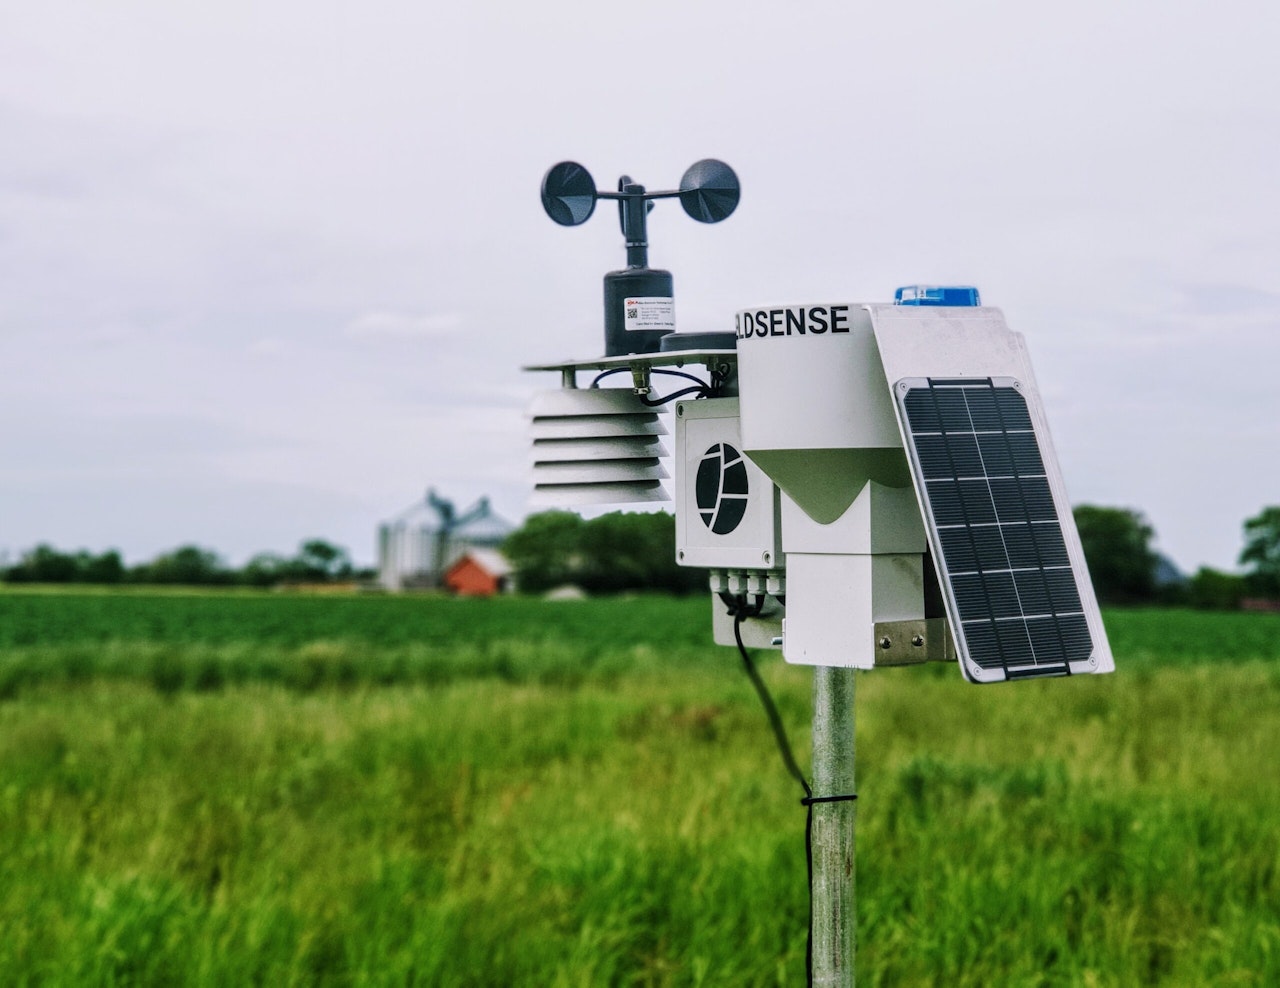 Data-driven agriculture to help farmers and the environment